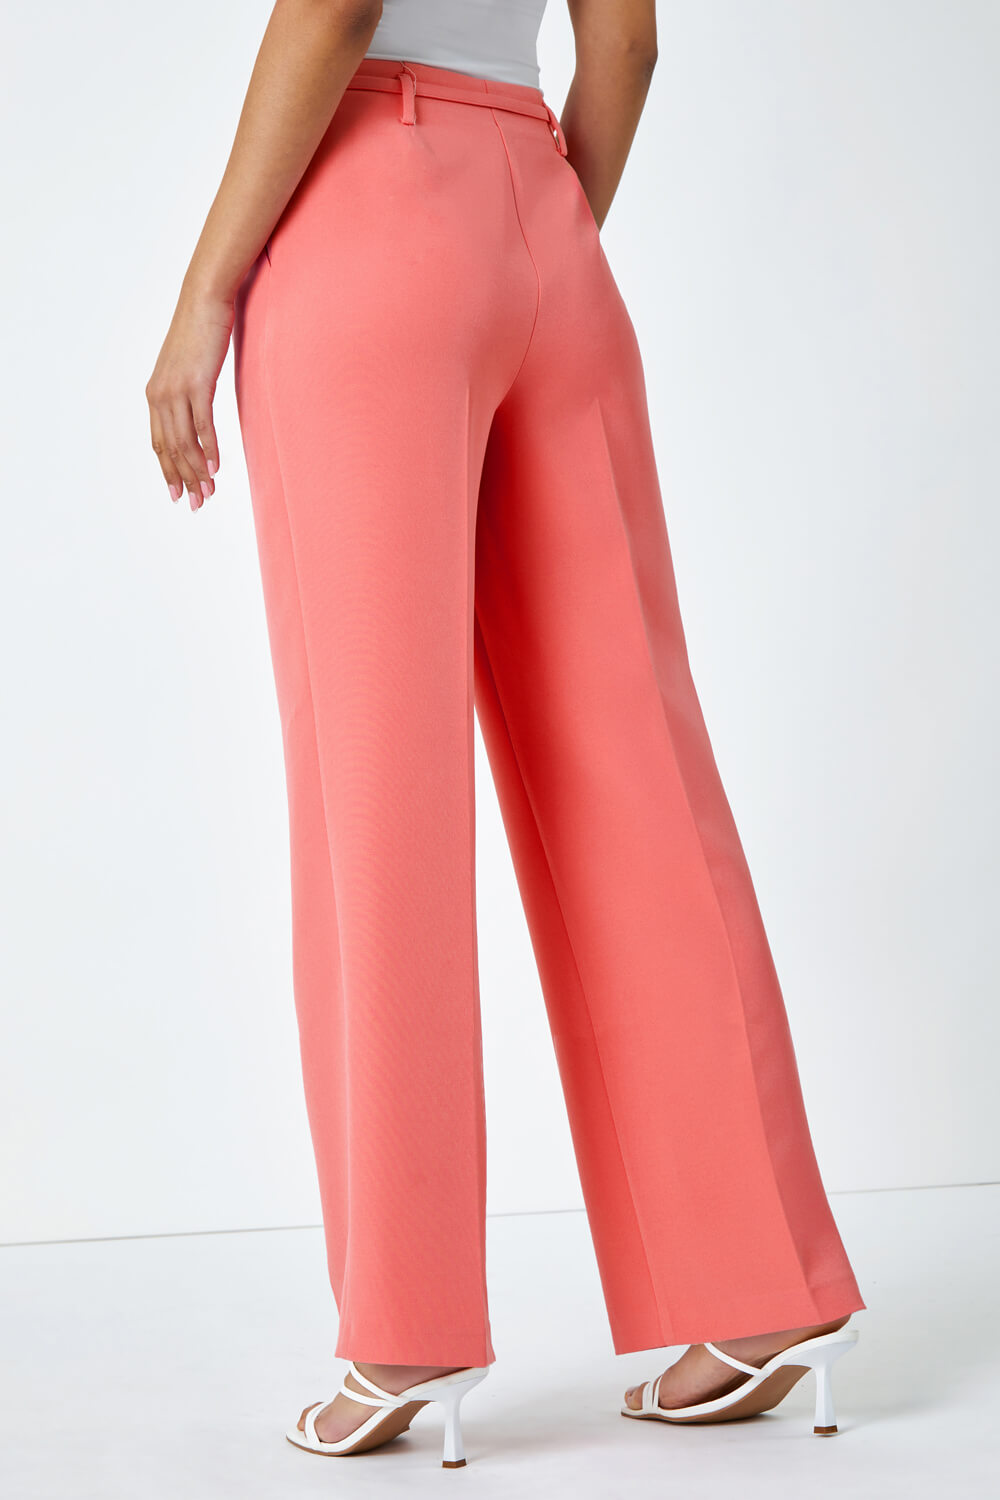 CORAL Crepe Stretch Straight Leg Trousers, Image 3 of 5